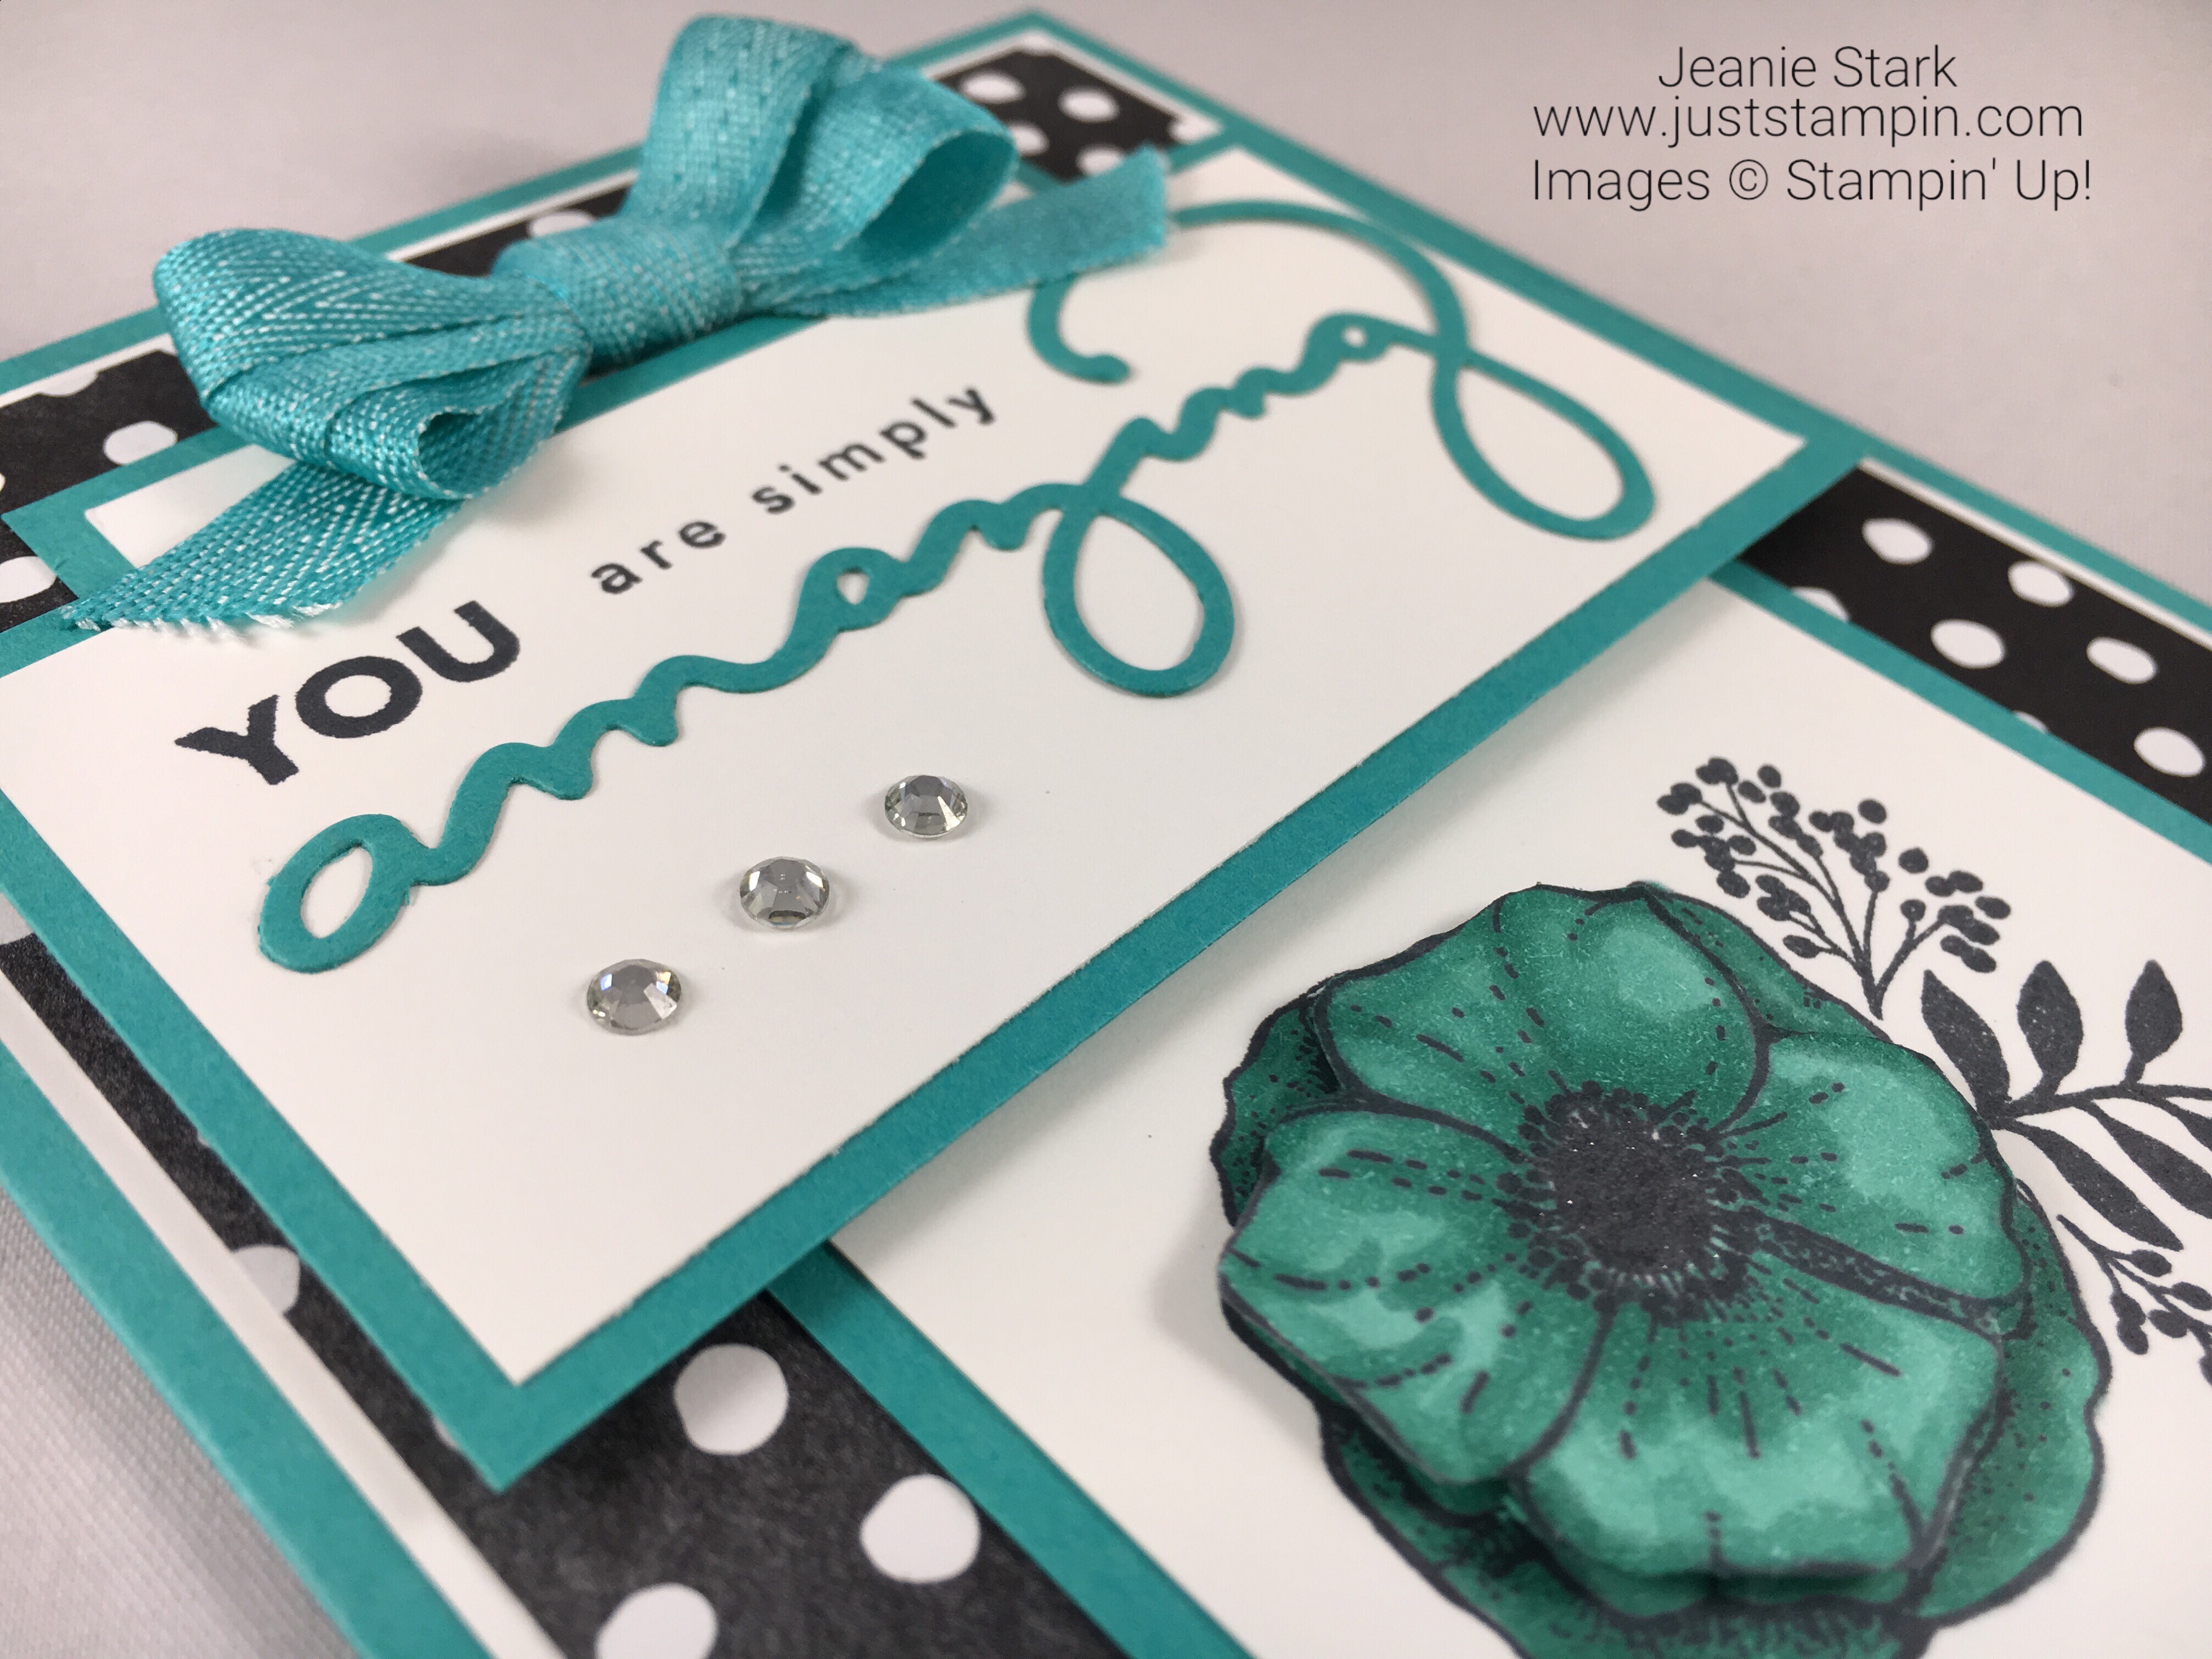 Stampin Up Amazing You Stamp Set and Celebrate You Thinlits card idea - Jeanie Stark StampinUp